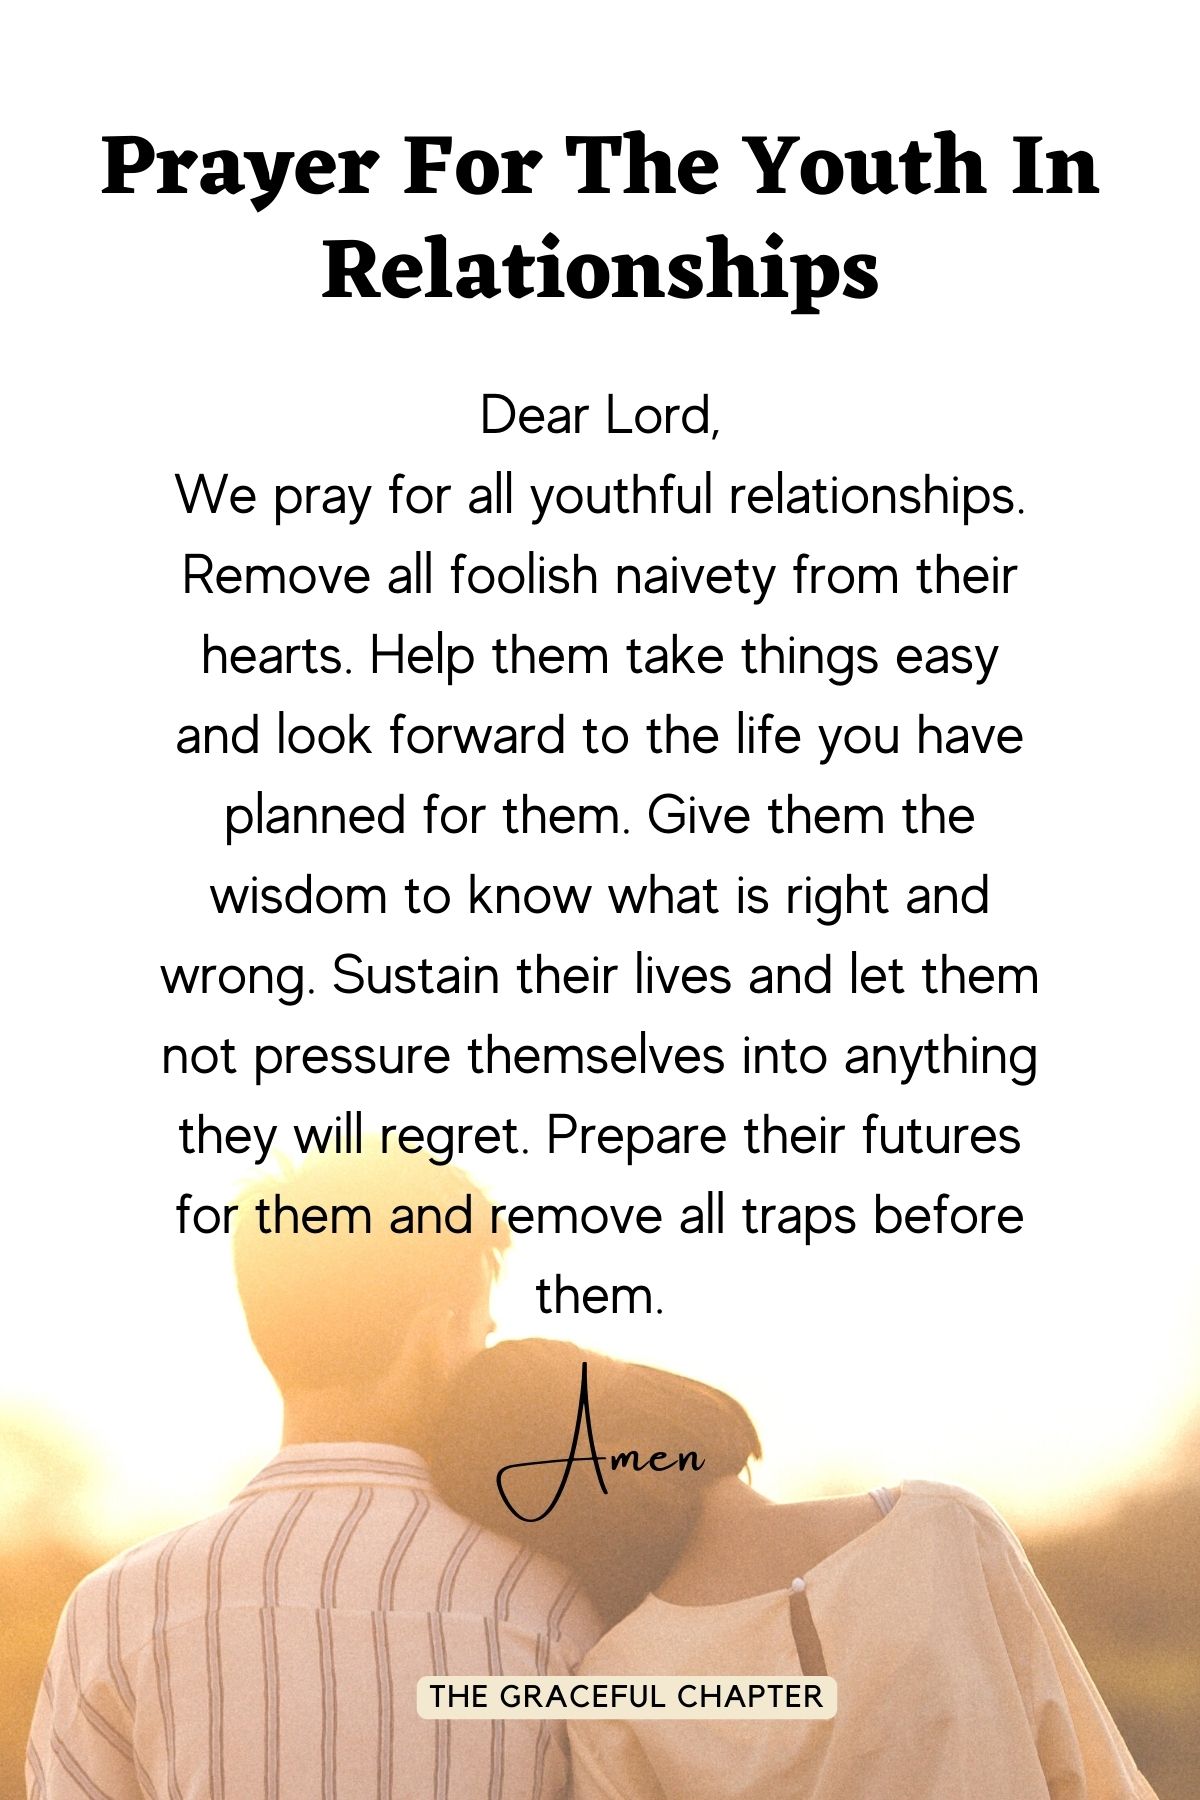 Prayer for the youth in relationships